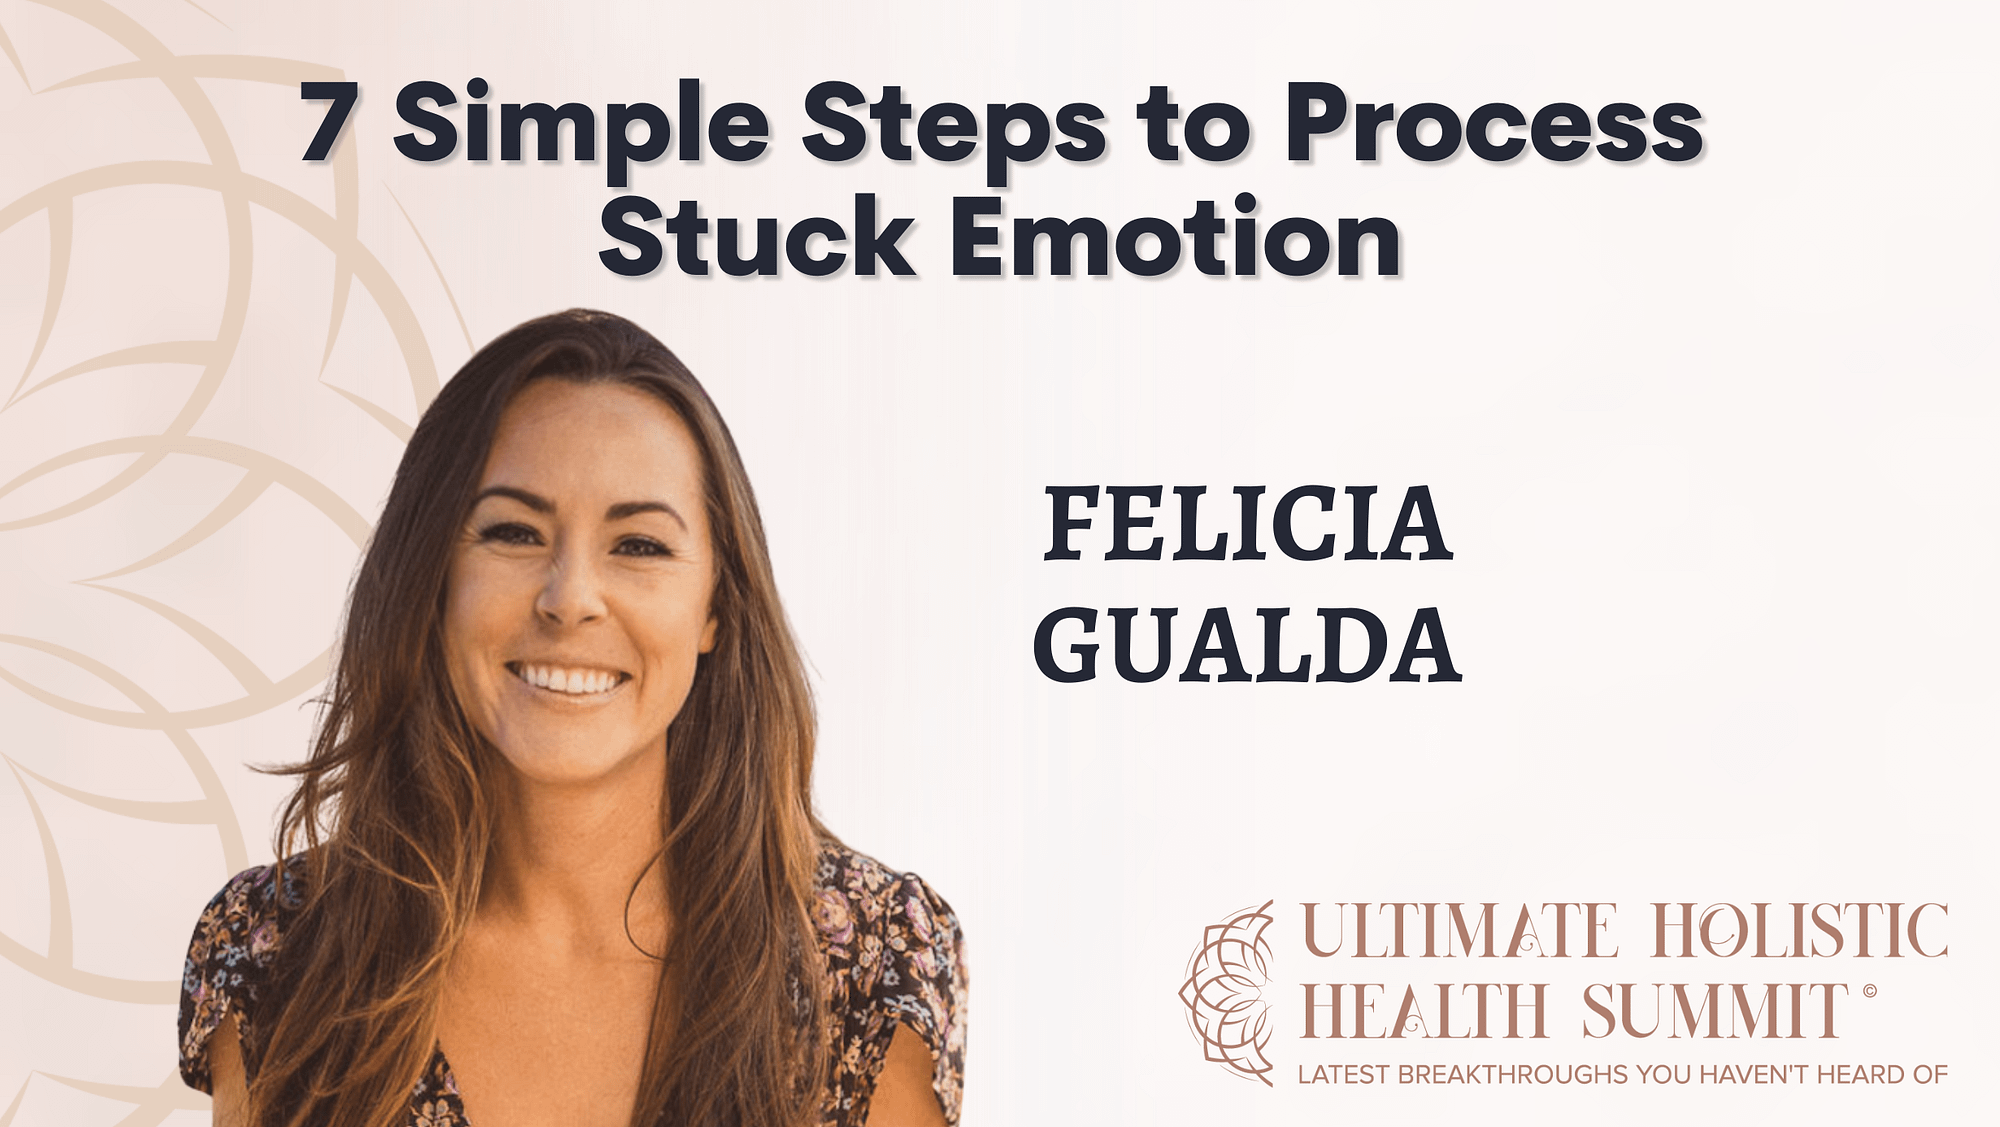 7 Simple Steps to Process Stuck Emotion